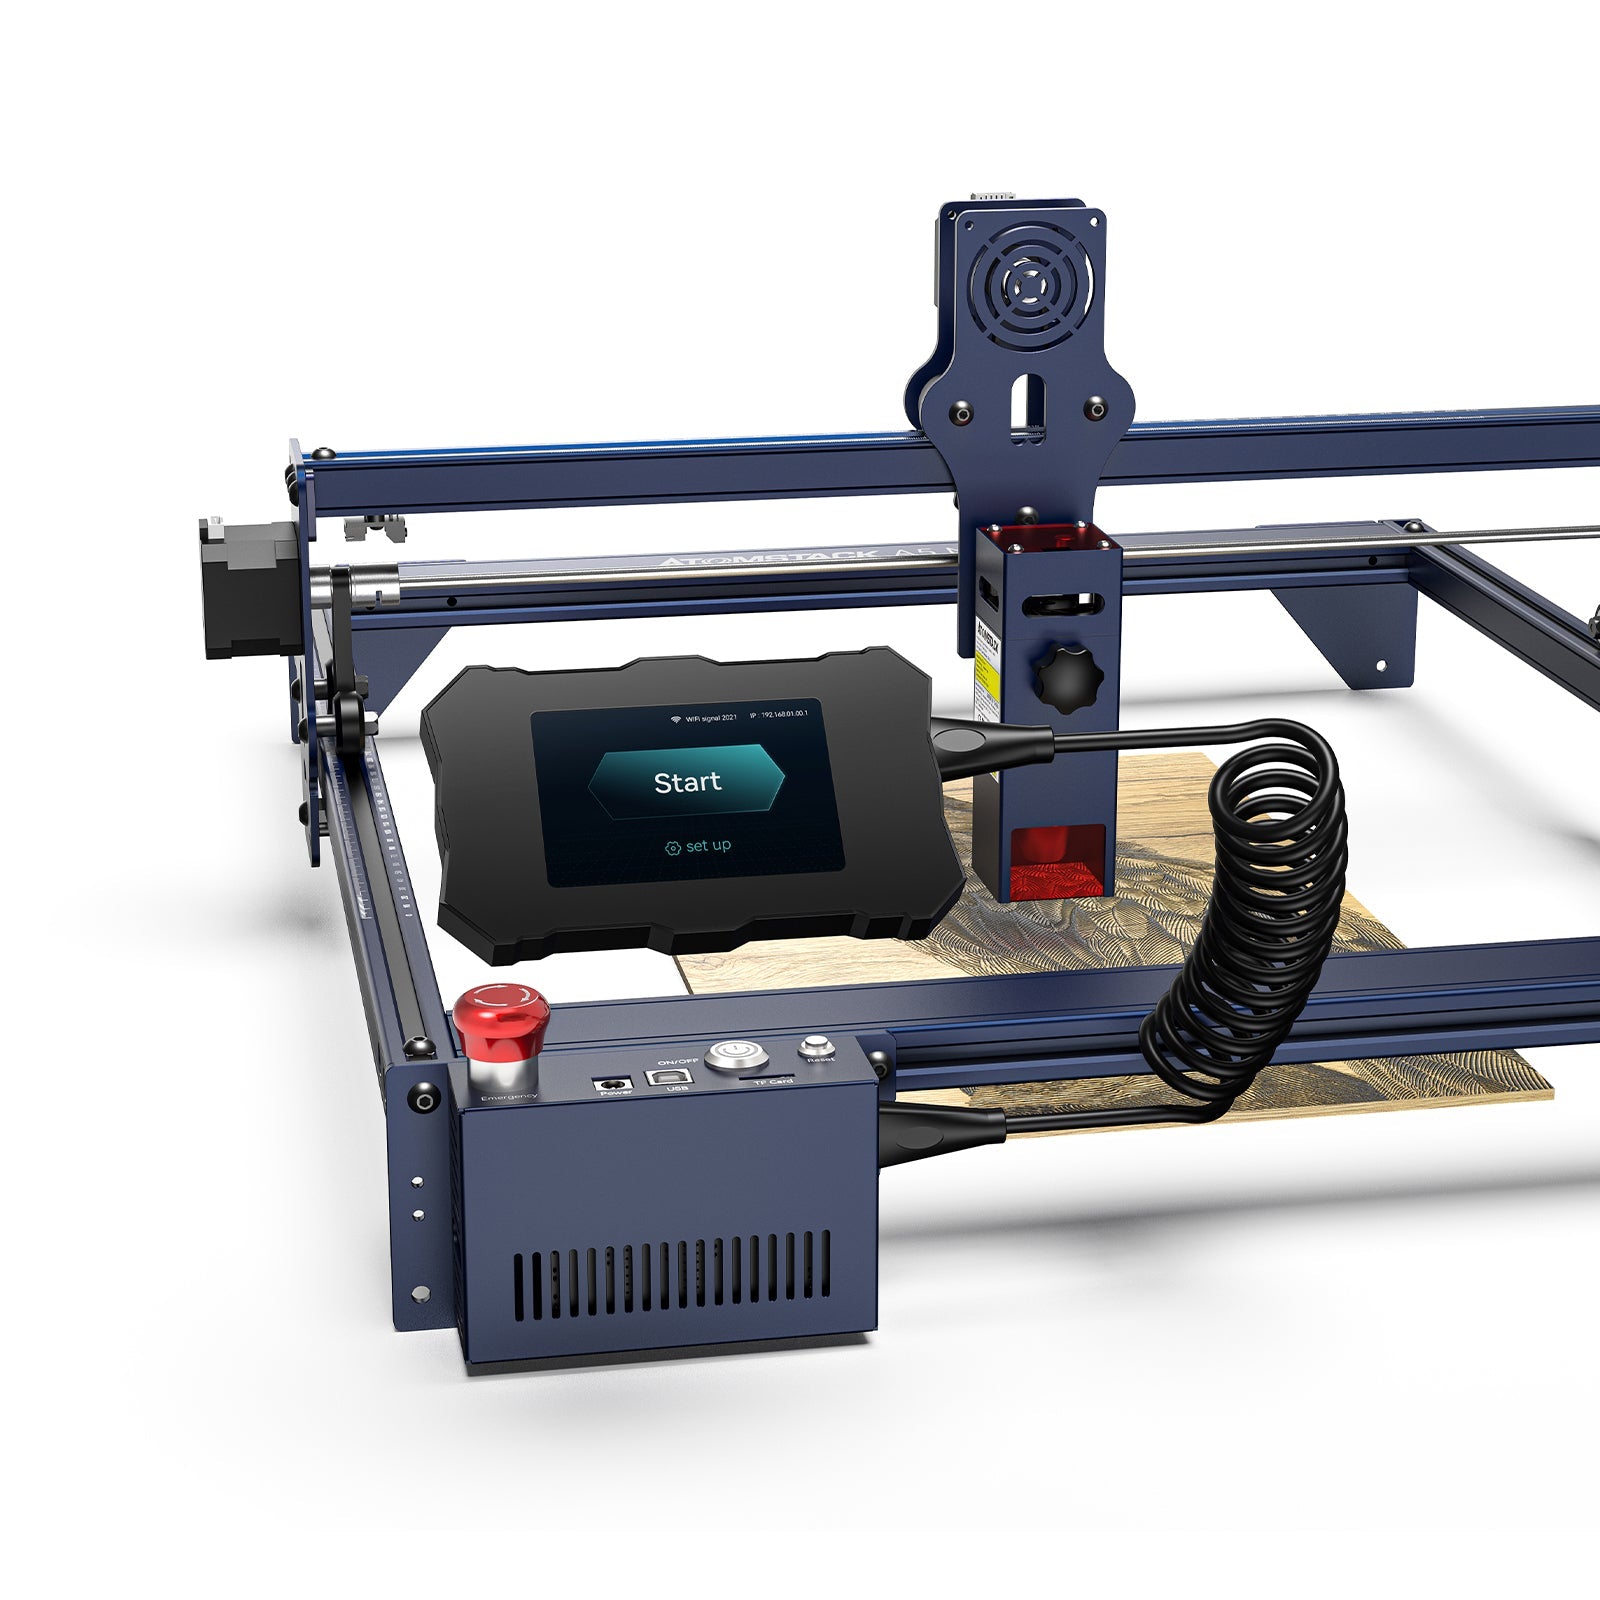 Printers Club Upgrade ATOMSTACK A5 Pro Laser Engraver 40W CNC Desktop DIY  Engraving Cutting Machine With 410x400 Area From Rogerricey, $454.26